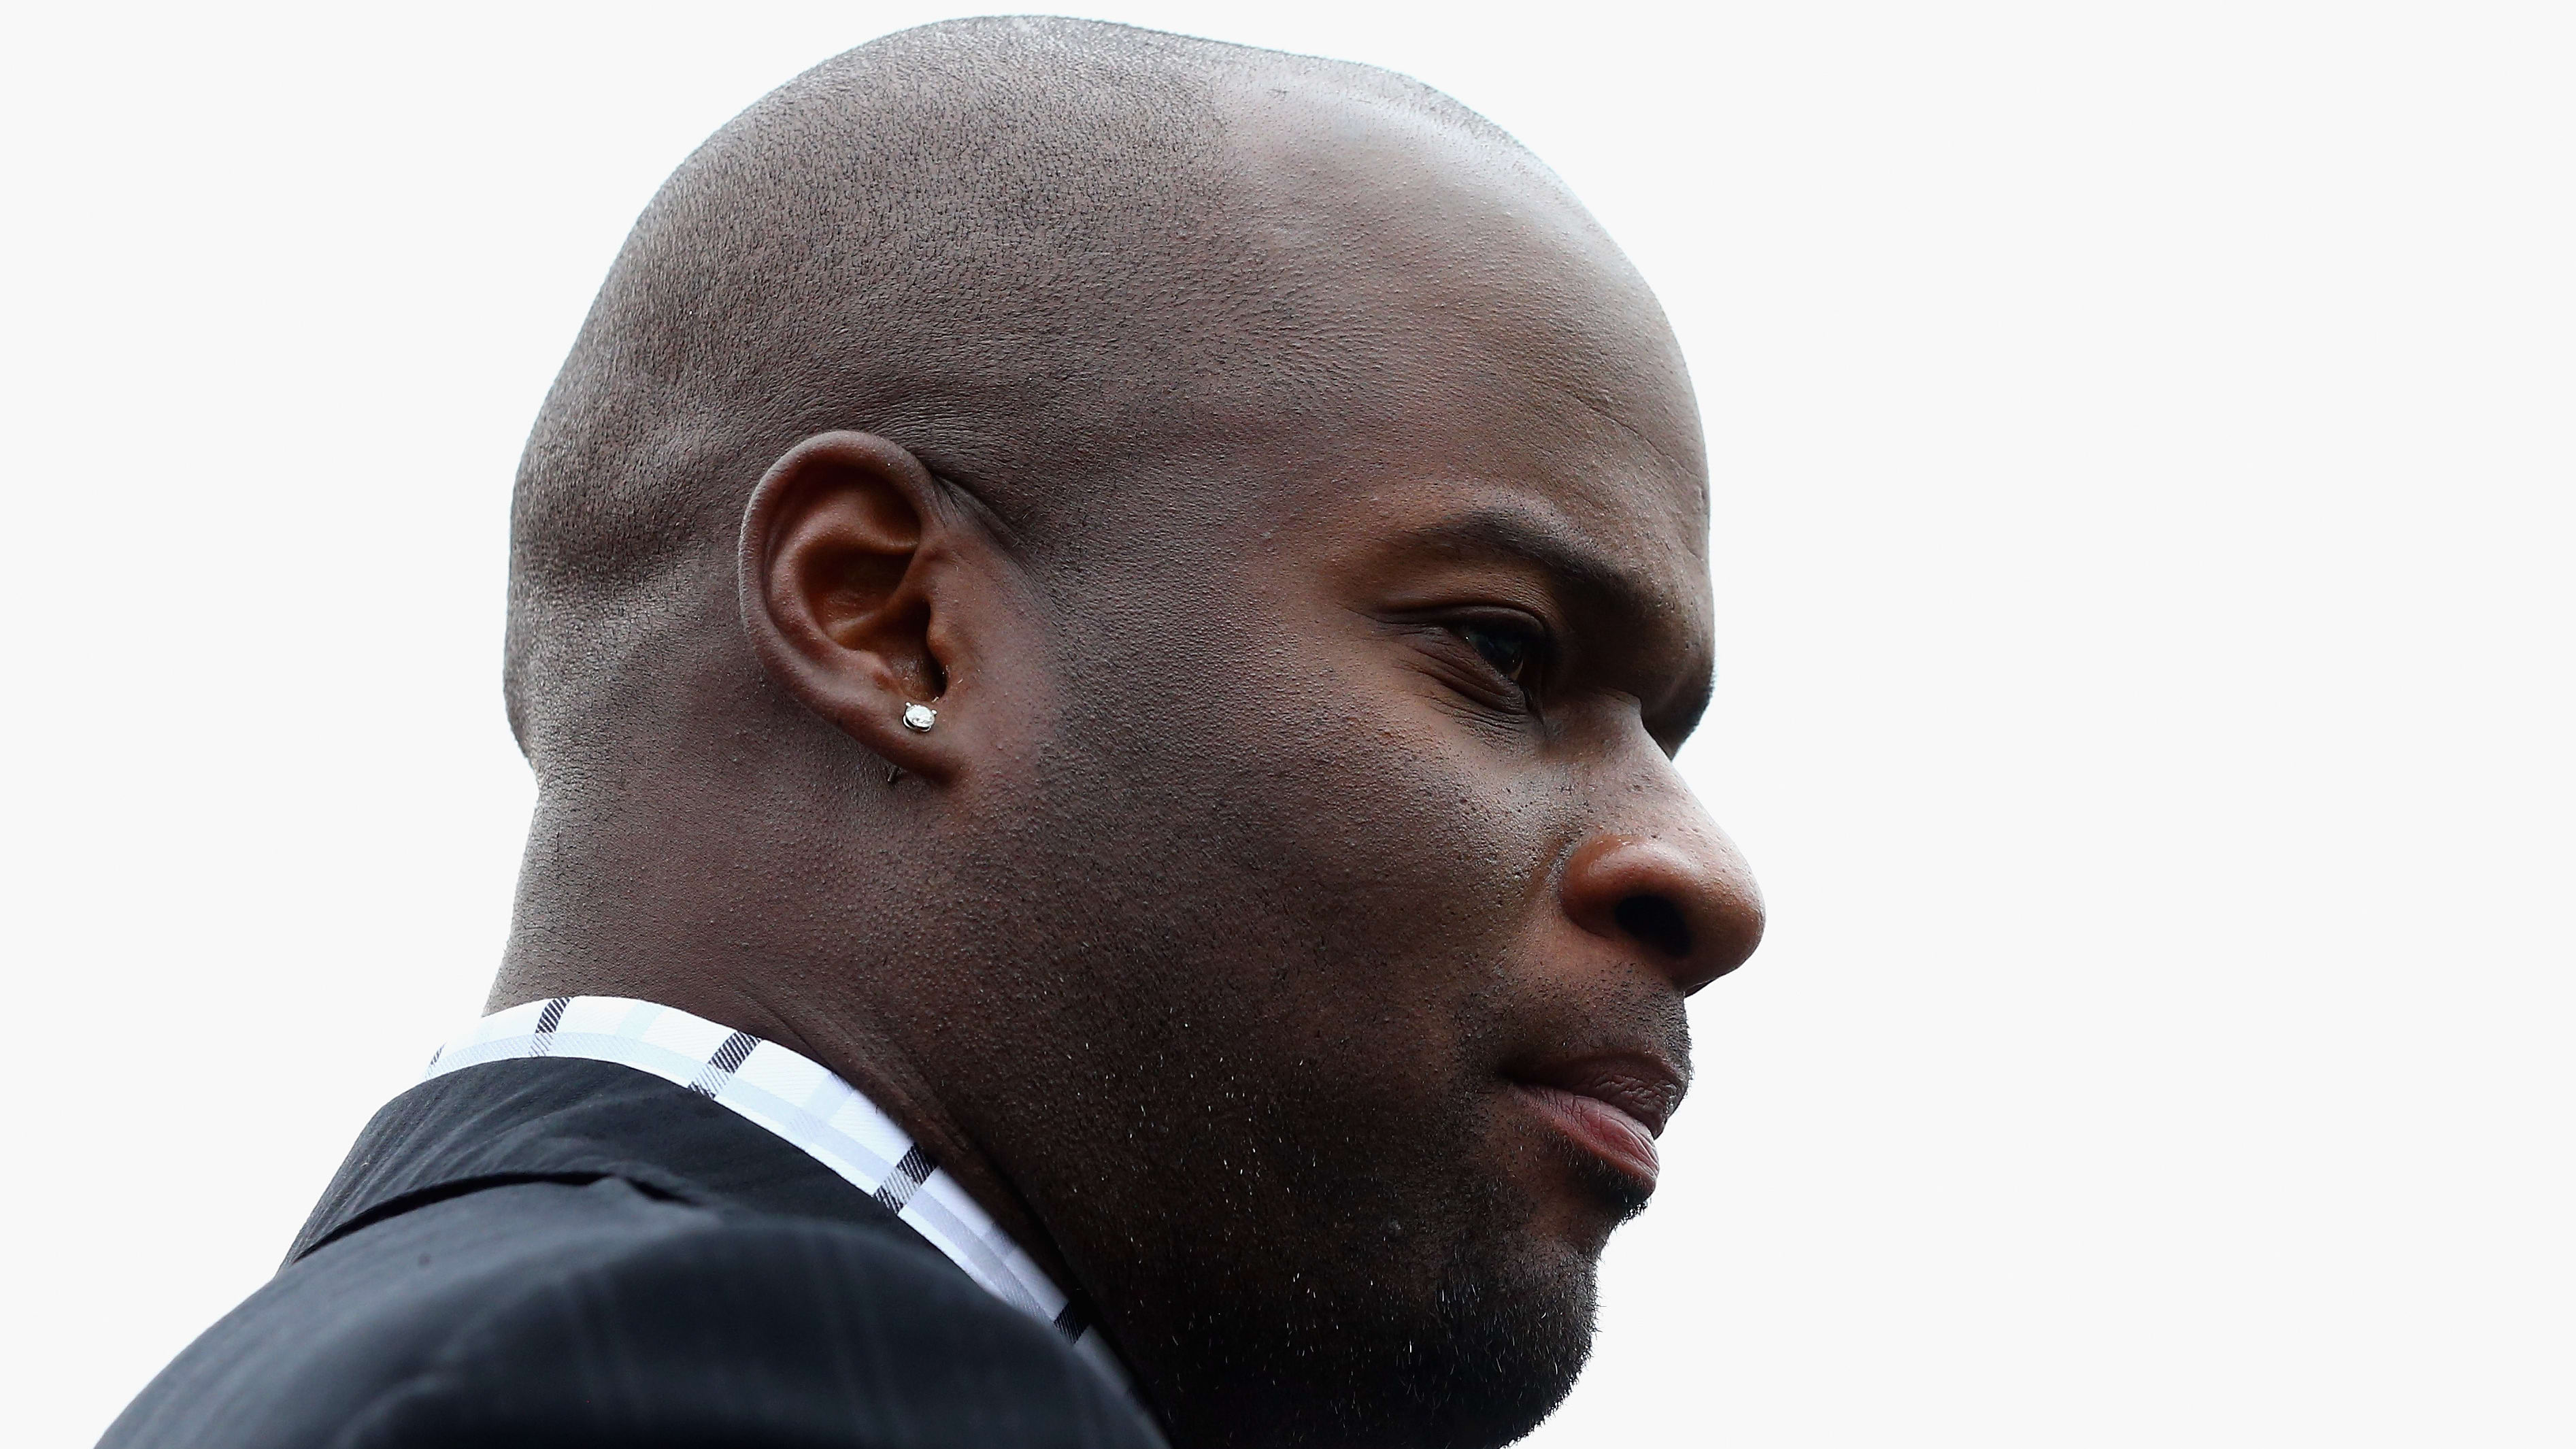 Former Texas Longhorns quarterback Vince Young on the sideline during a college football game.